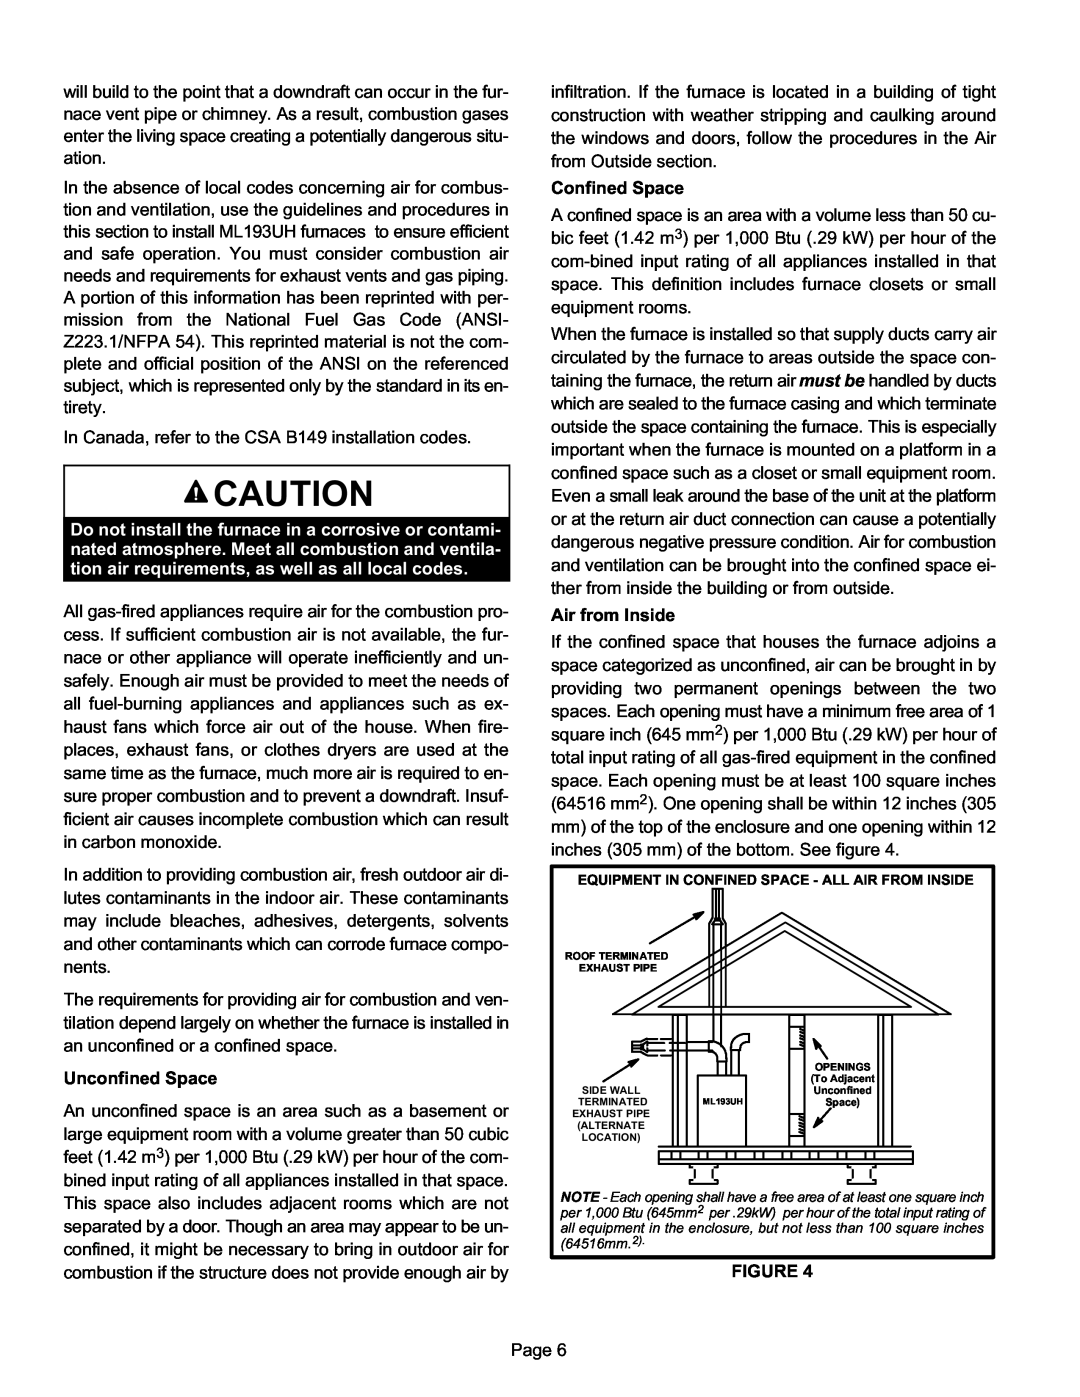 Lennox International Inc ML193UH installation instructions Confined Space, Air from Inside, Unconfined Space 